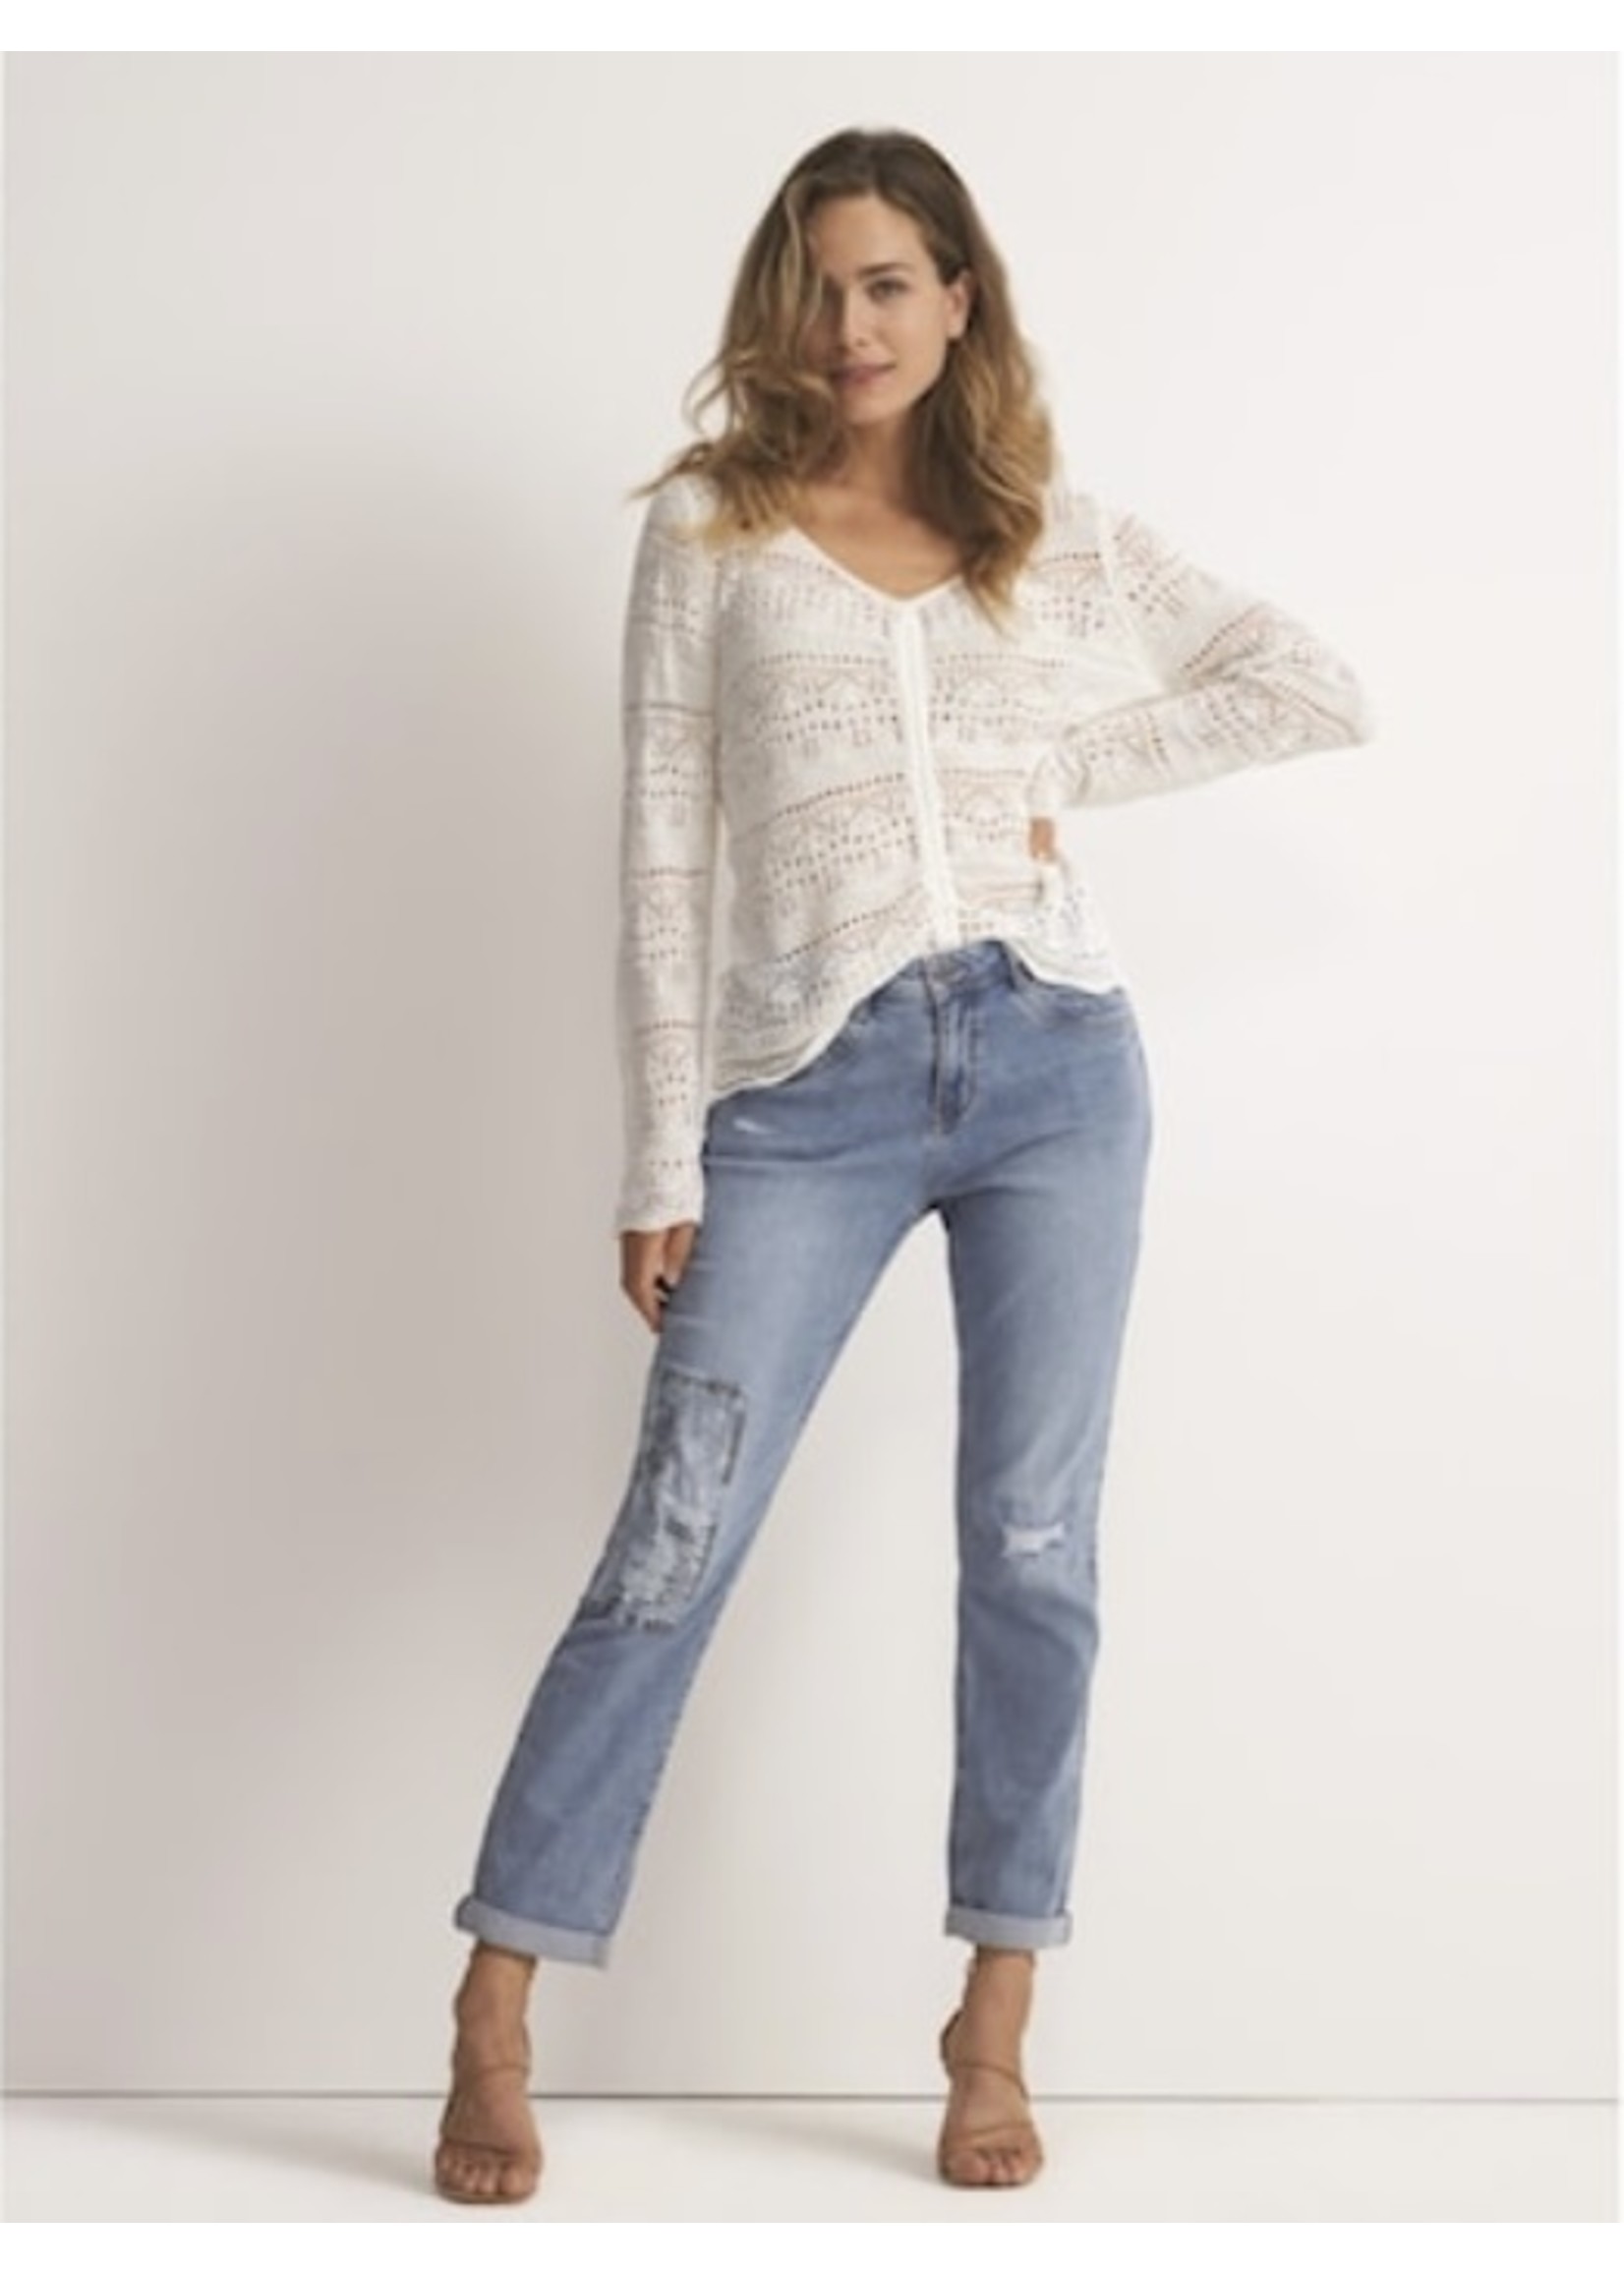 Red Button Kate patchwork - Jeans - Light Stone